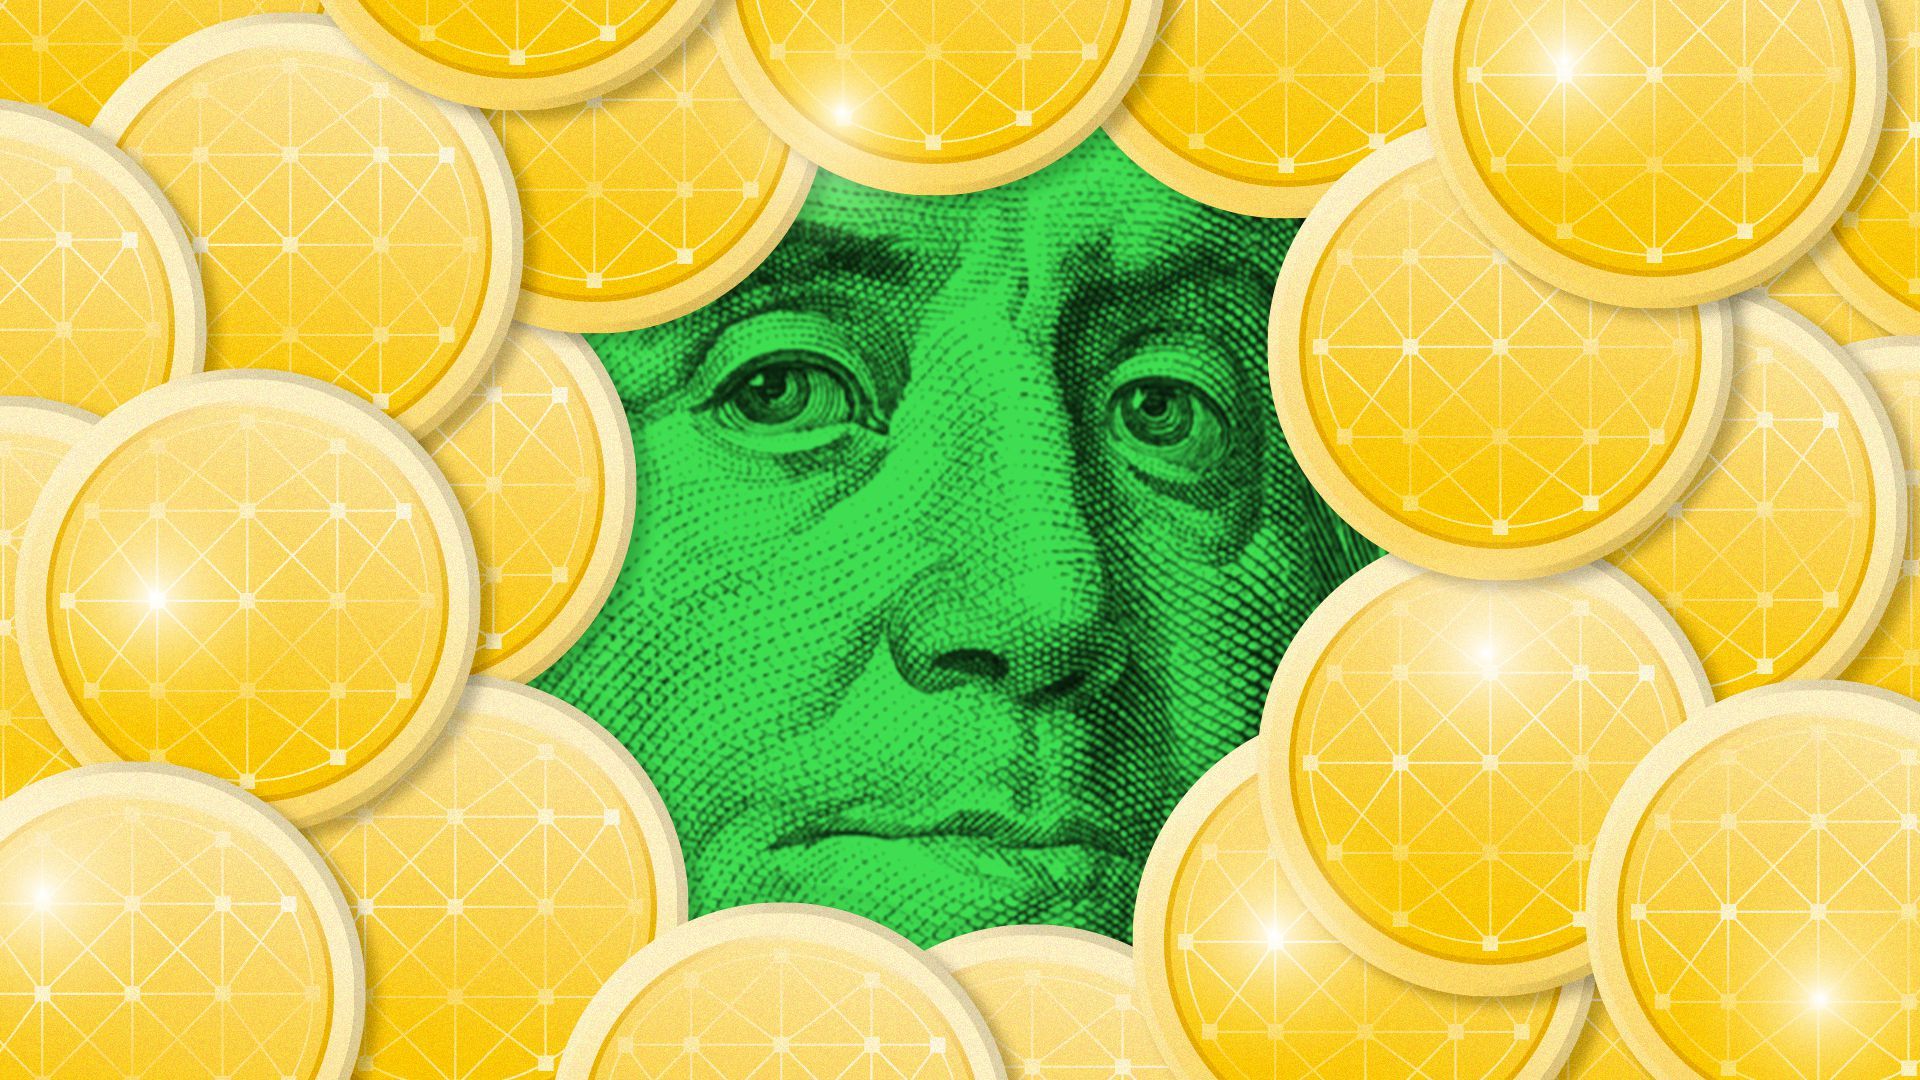 Illustration of Ben Franklin peering out from behind a pile of crypto coins.